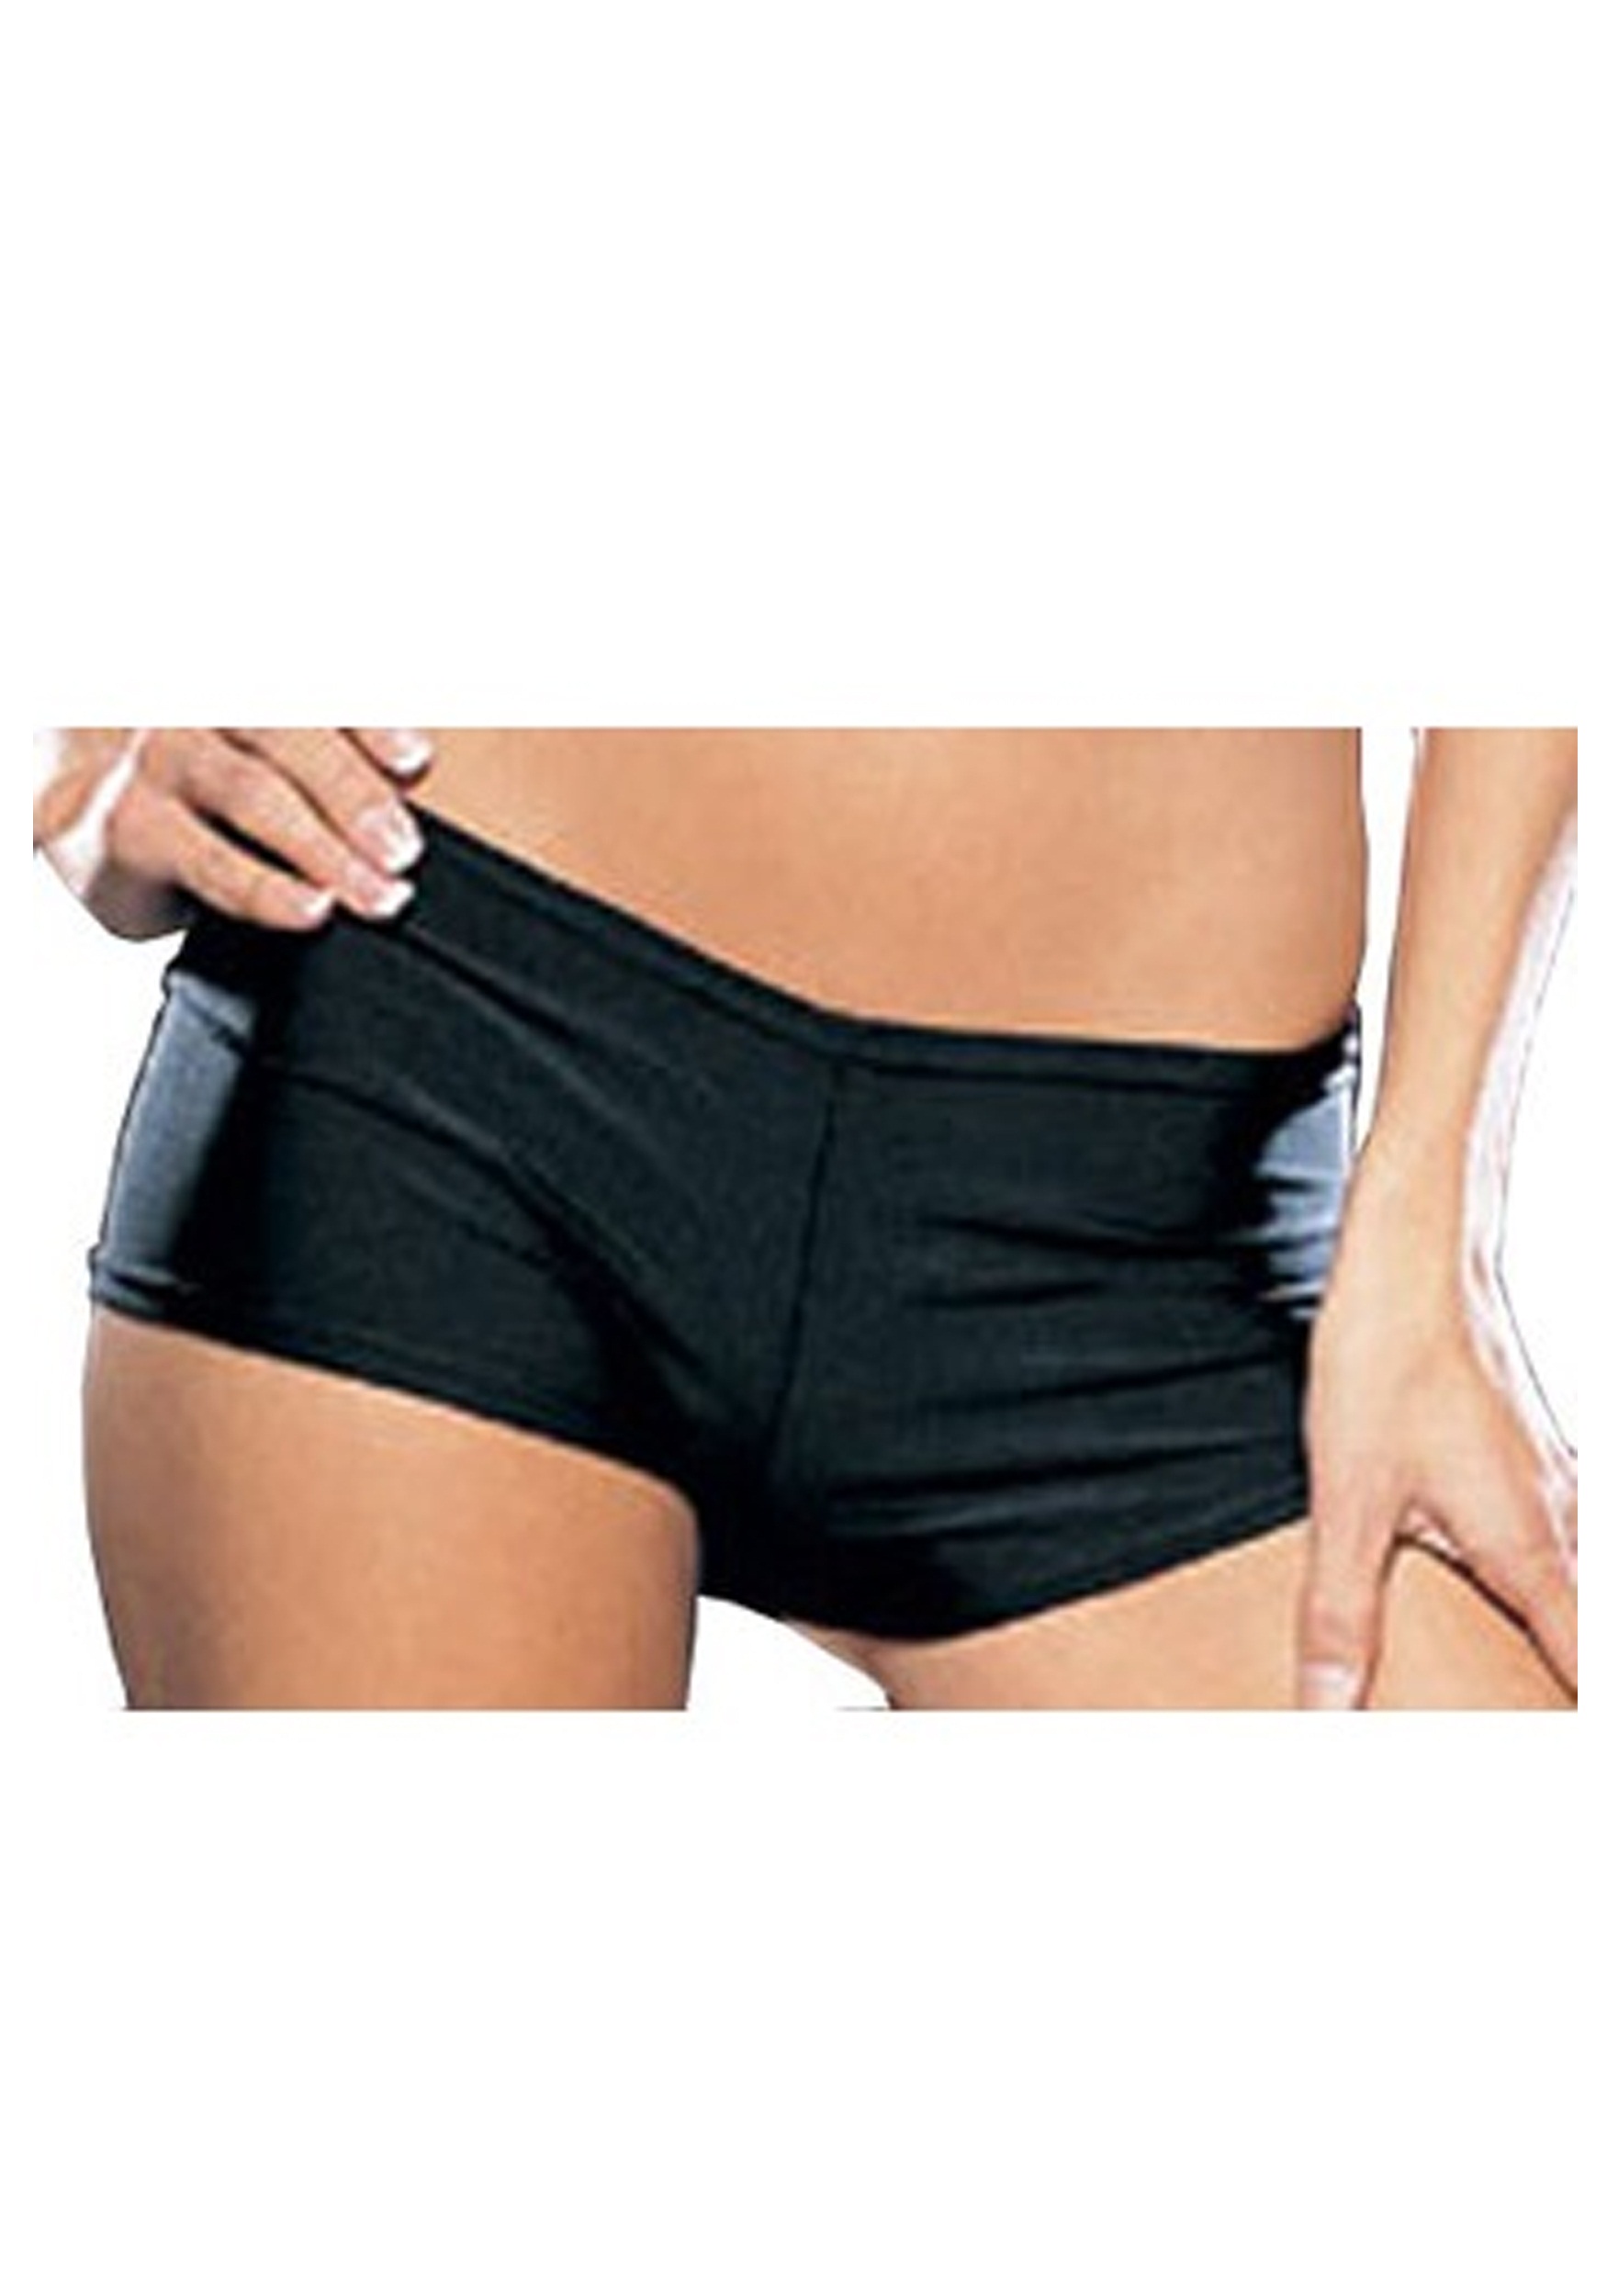 Sexy Black Hot Pants For Adults , Adult Fancy Dress Costume Accessories